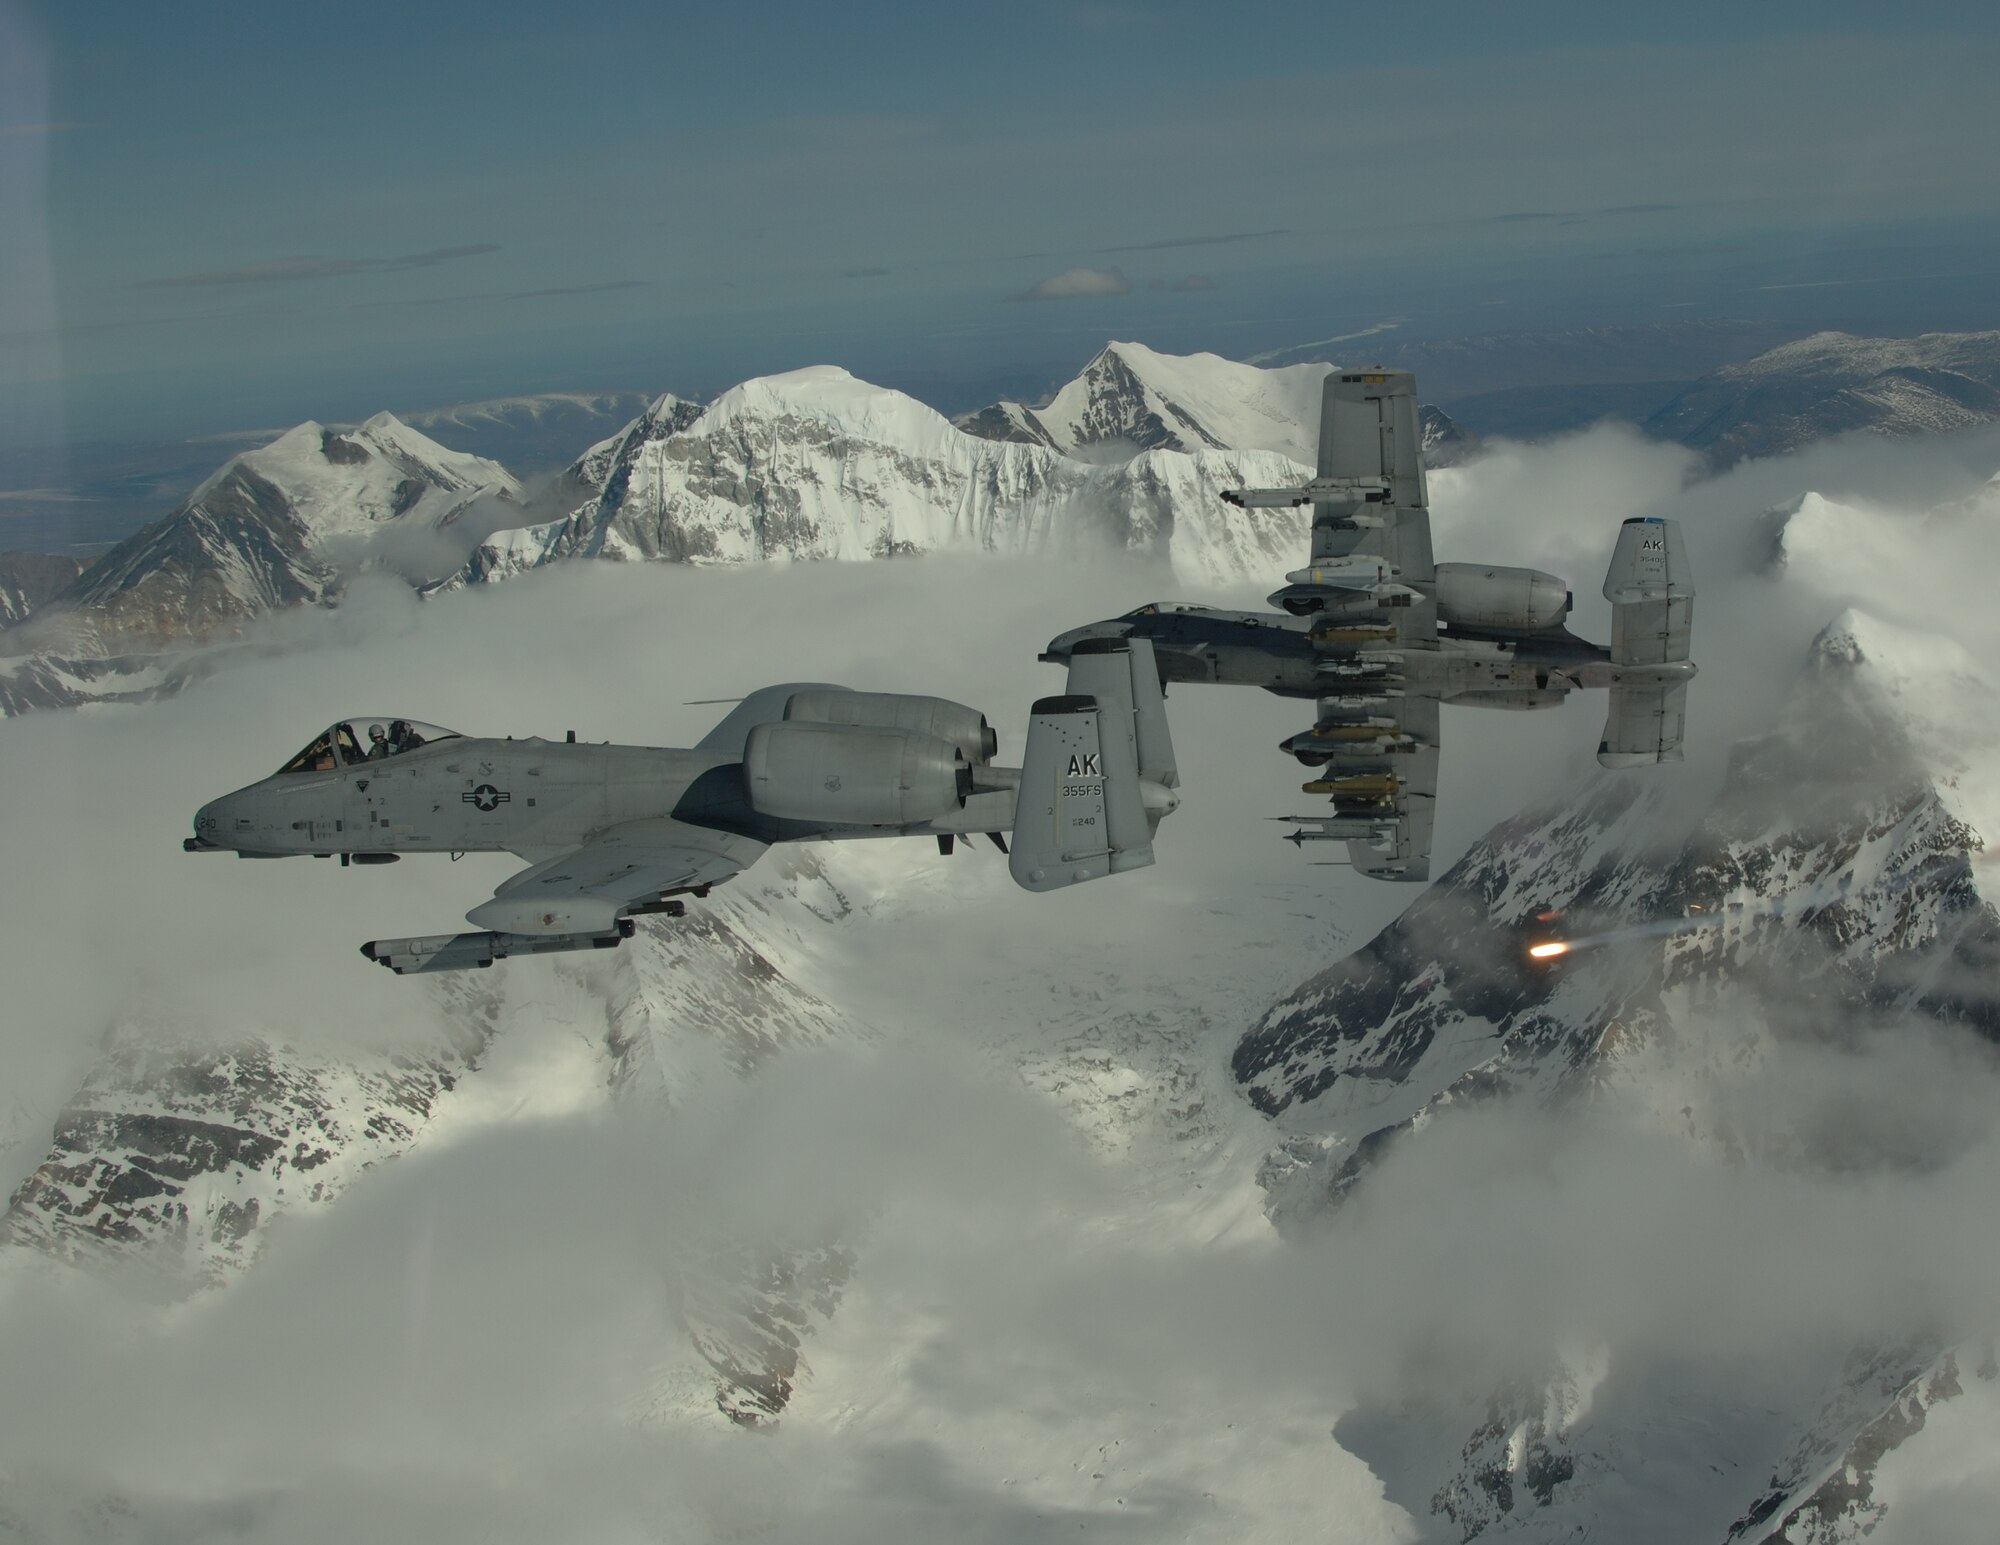 EIELSON AIR FORCE BASE, Alaska-- A/OA-10 Warthog's from the 355th Fighter Squadron break over the Pacific Alaska Range Complex during live fire training.The 355th Fighter Squadron is tasked to provide mission ready A/OA-10s, as well as search and rescue capability in Alaska and deployed sites worldwide. (U.S. Air Force photo by Master Sgt. Robert Wieland) 